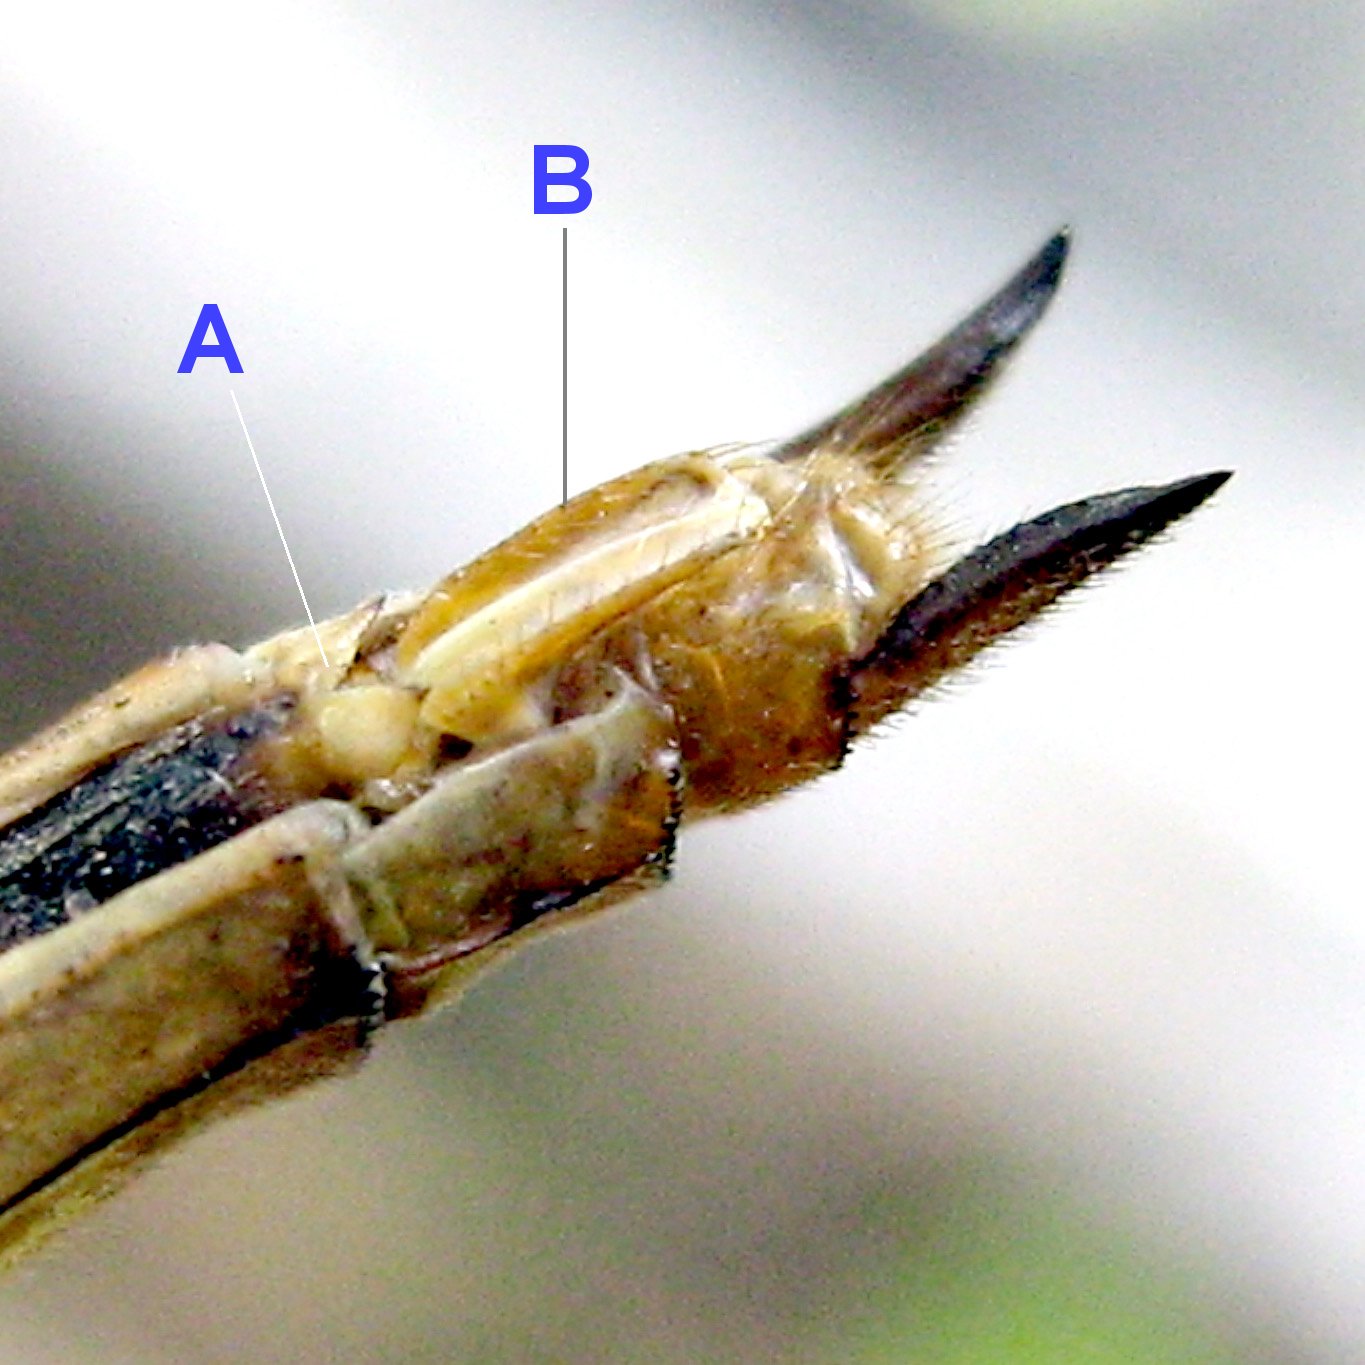 View from bottom. Of segment 8, 9, 10. On segment 9 is the Ovipositor (Egg-laying apparatus) with 2 interesting apparatus